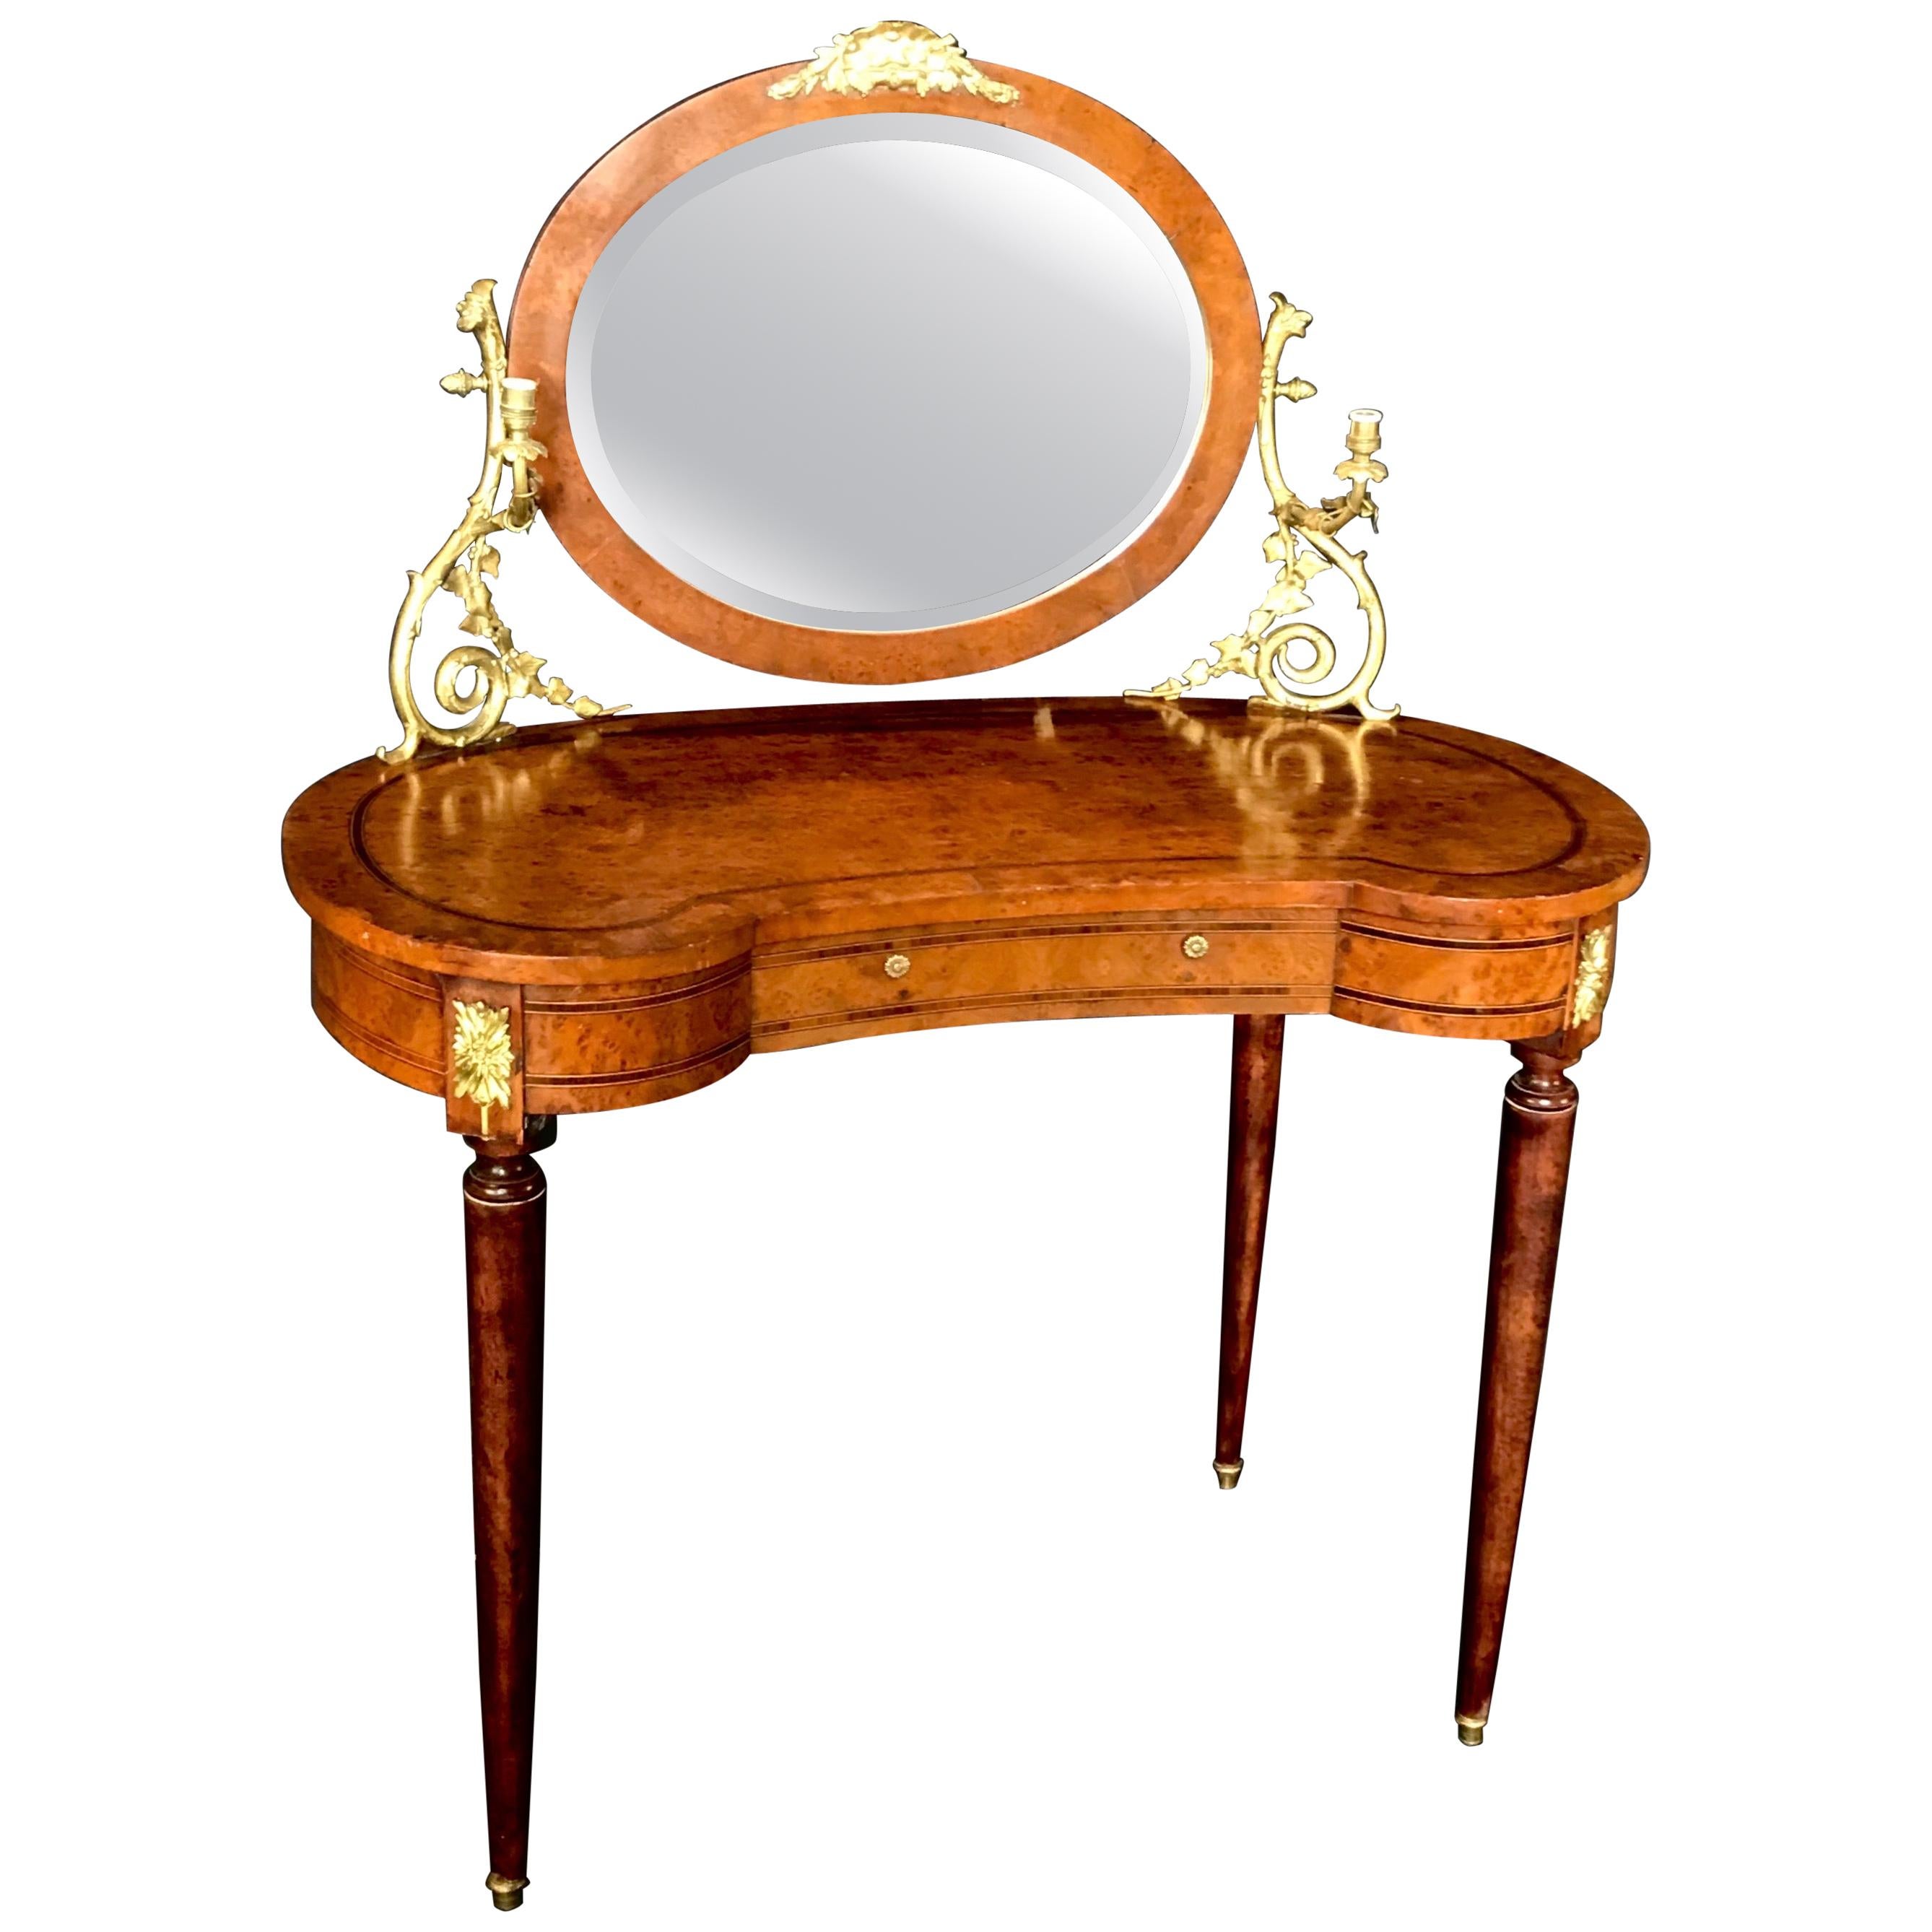 French Inlaid Burled Walnut Gilt Bronze Mounted Dressing Table with Candle Arms